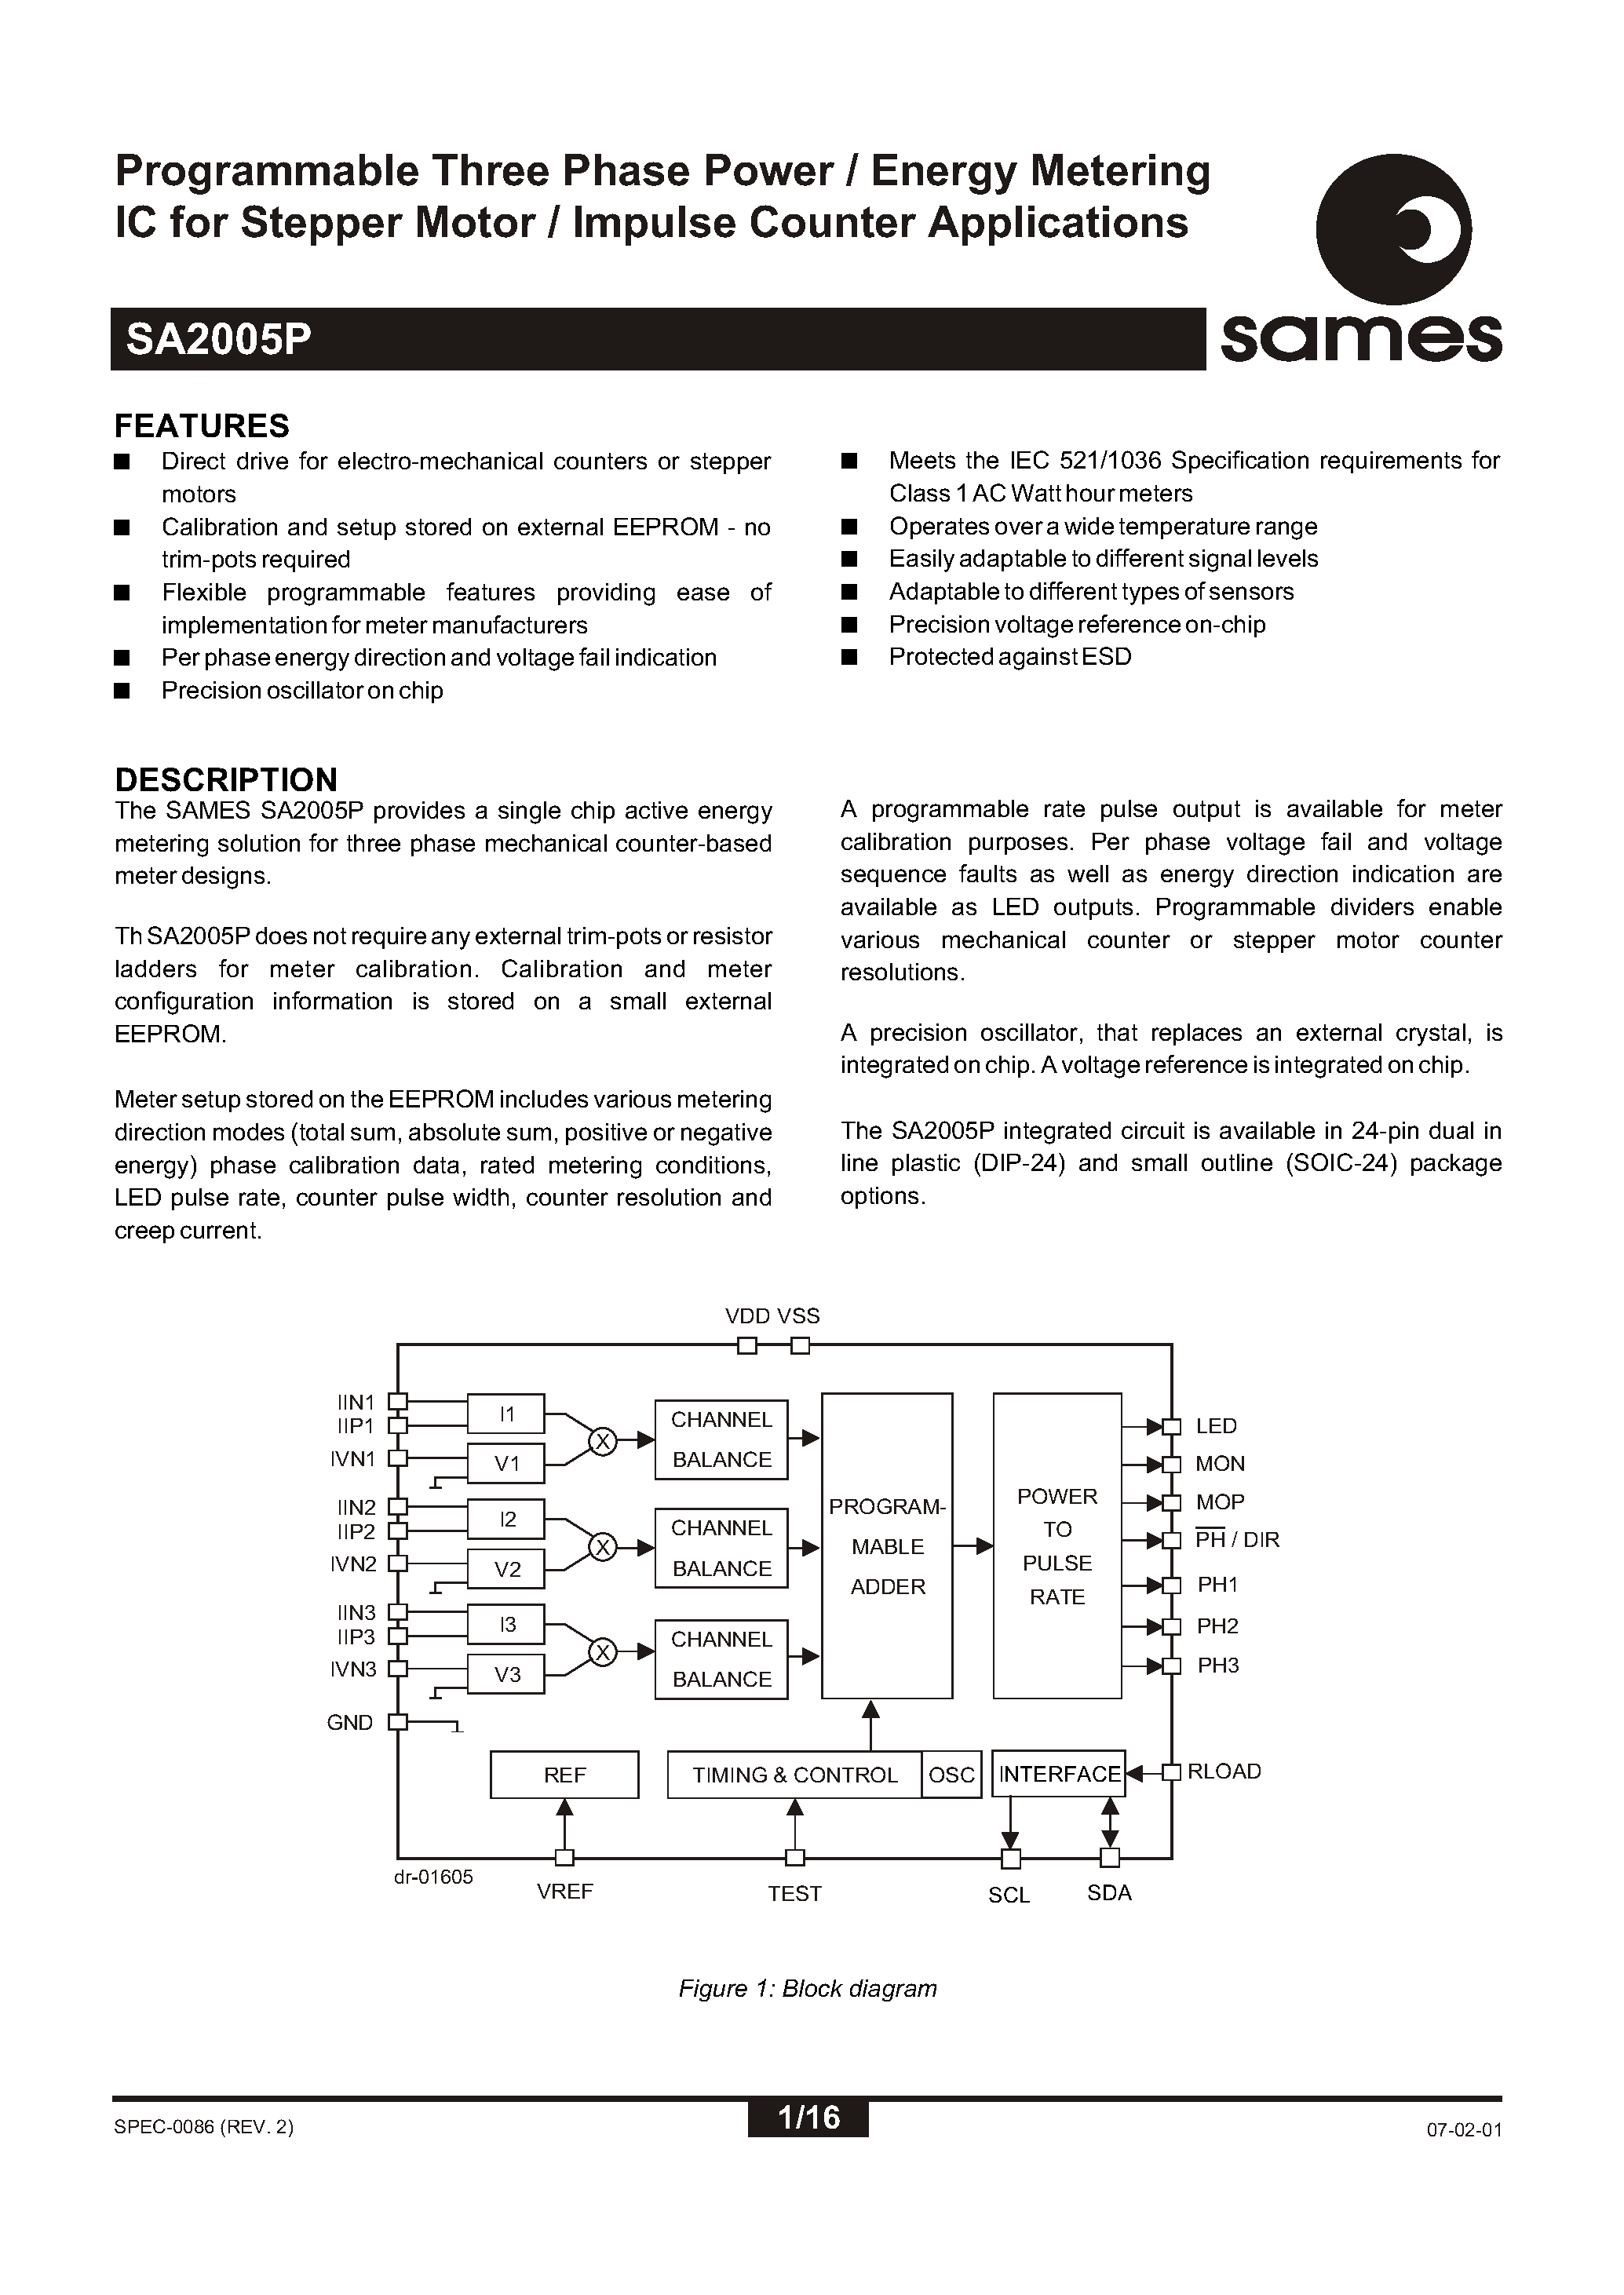 Даташит SA2005PSA - Programmable Three Phase Power / Energy Metering IC for Stepper Motor / Impulse Counter Applications страница 1